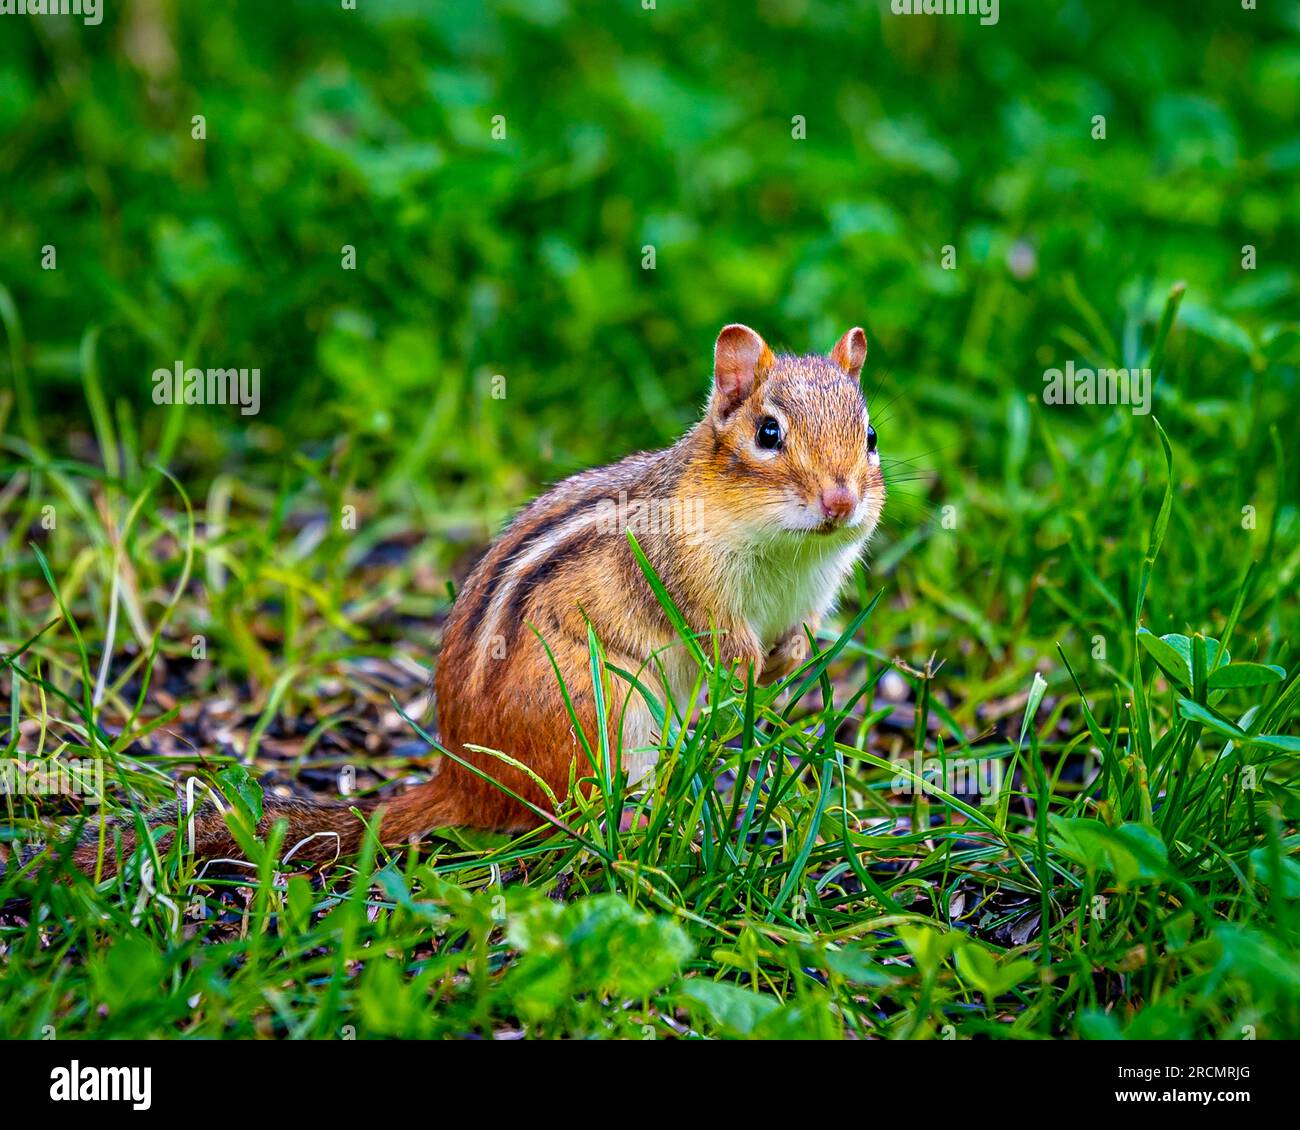 Chipmunks live in parks, gardens, forest clearings. They are omnivorous, feeding on seeds, nuts, invertebrates and even small eggs. Stock Photo